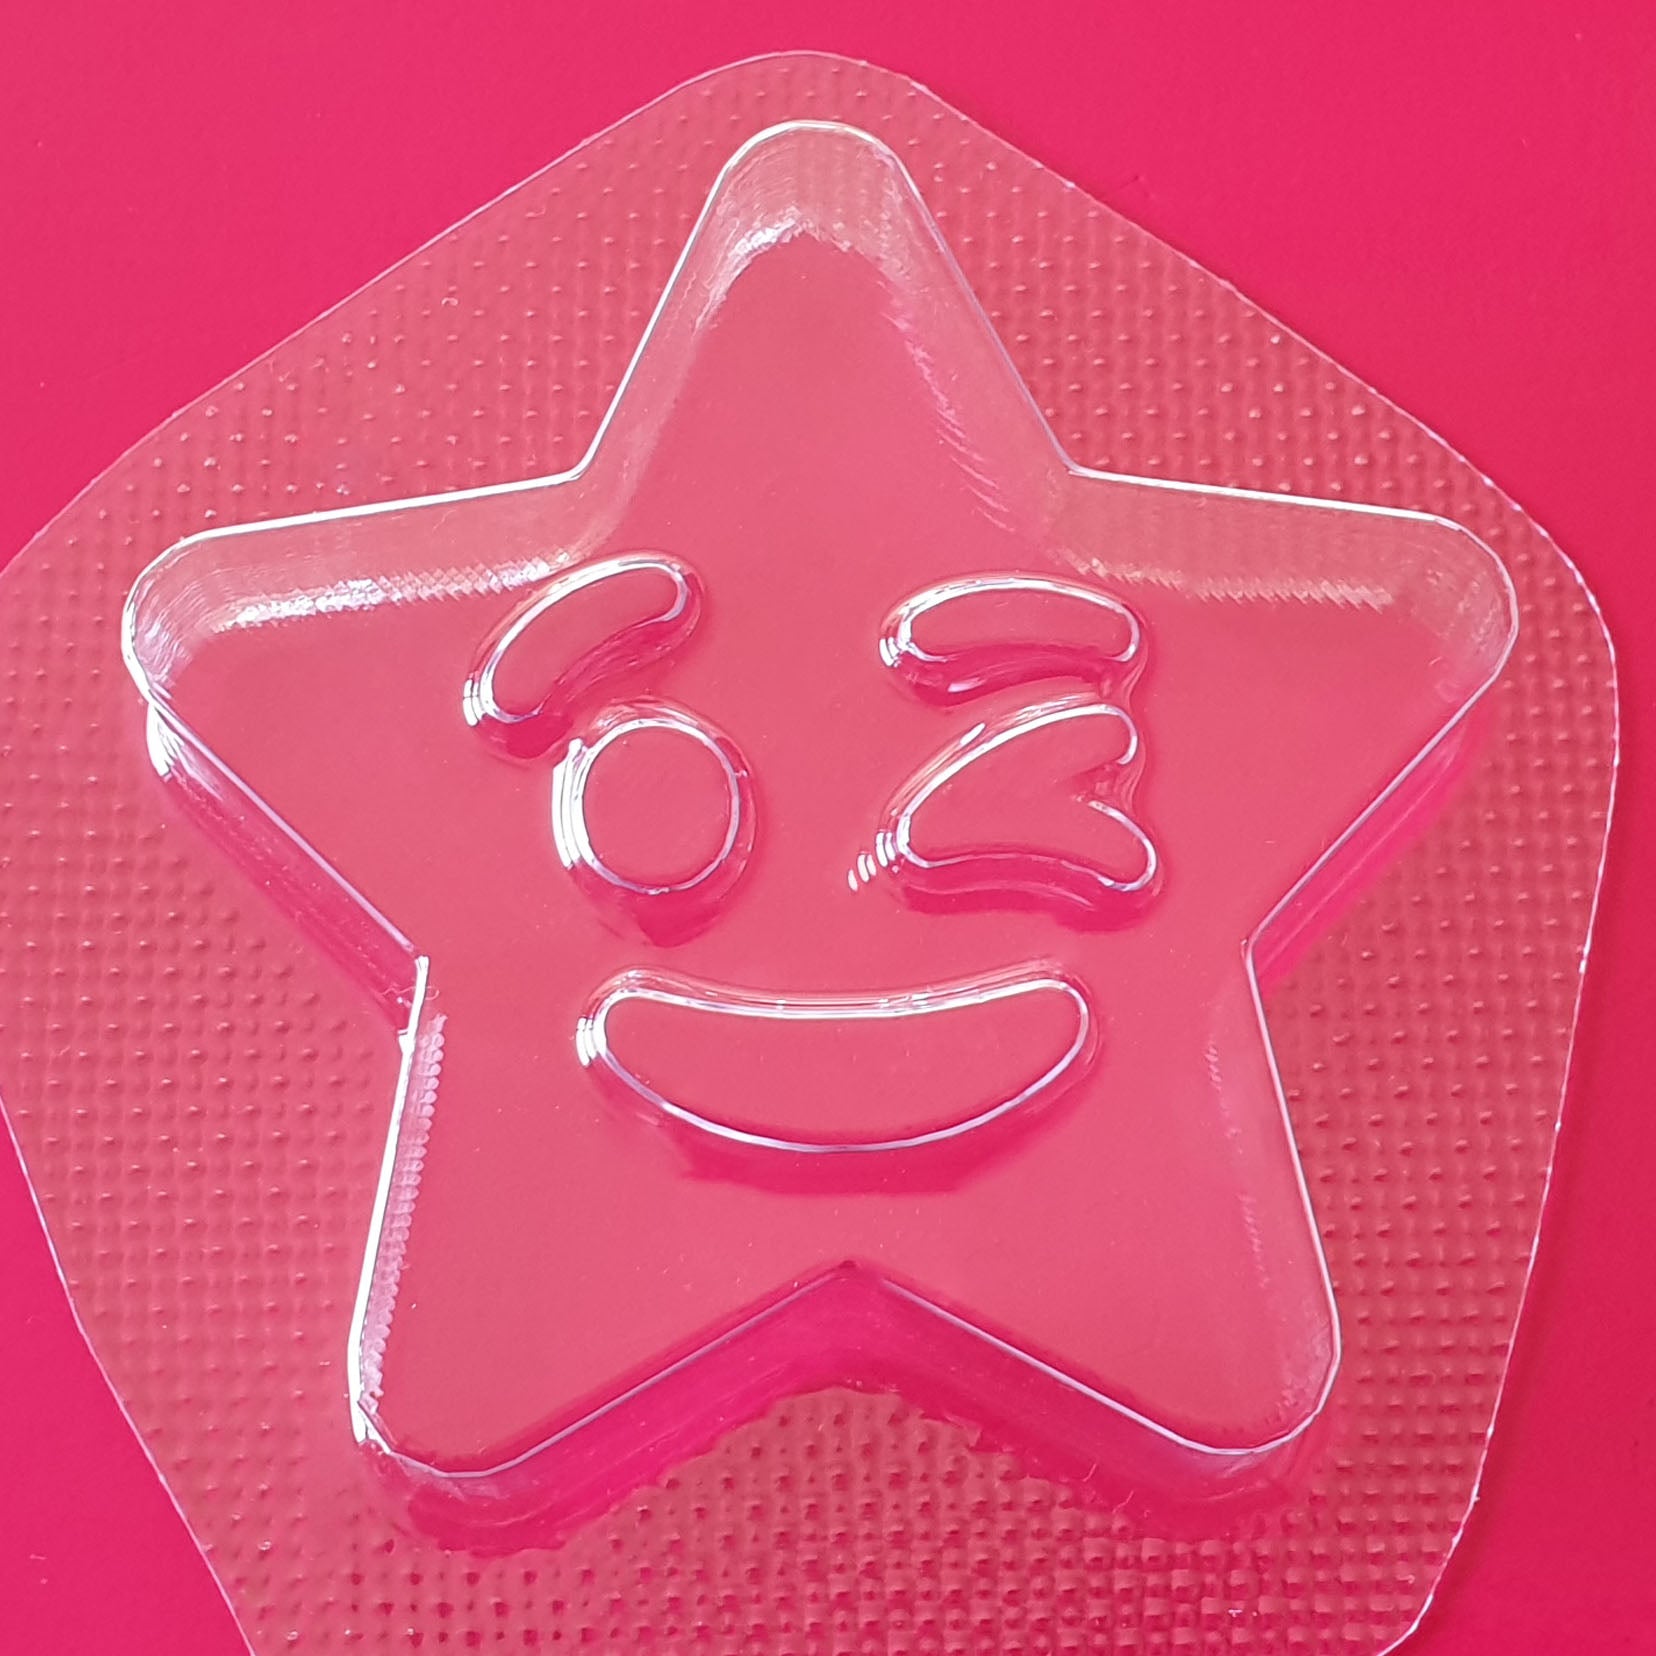 Winking Star Bath Bomb Mould by Truly Personal